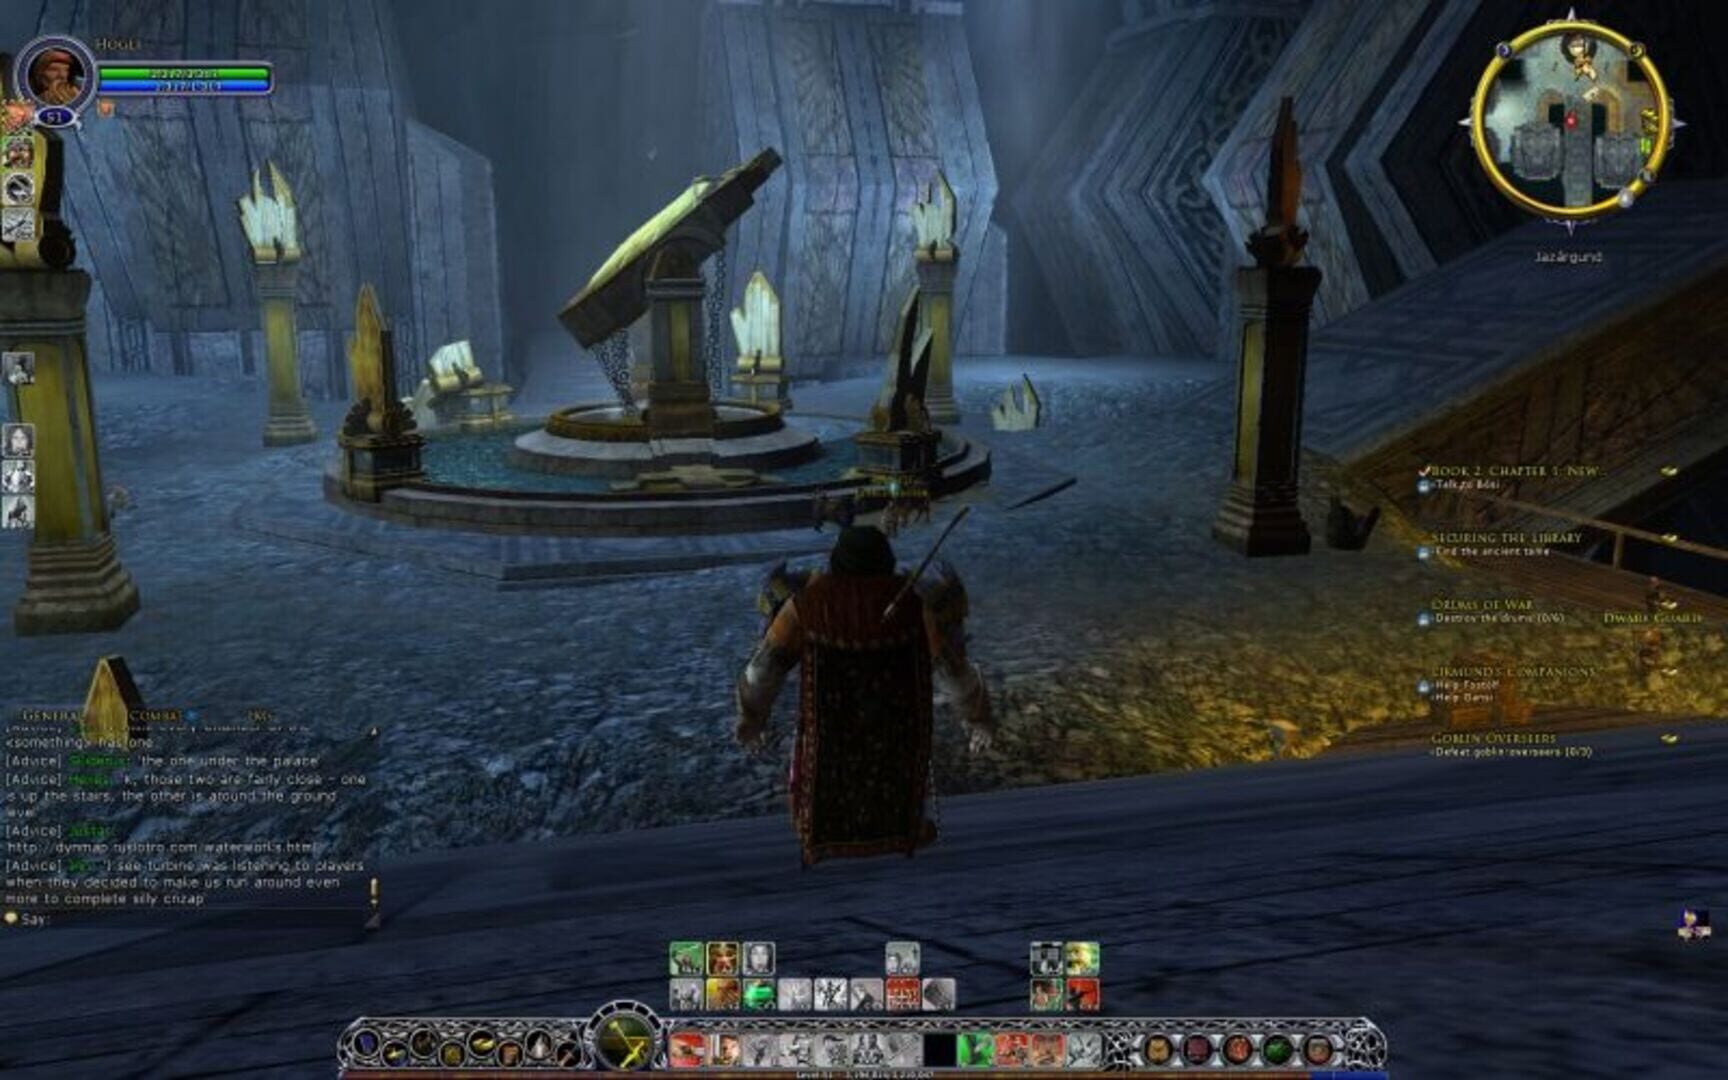 Captura de pantalla - The Lord of the Rings Online: Mines of Moria